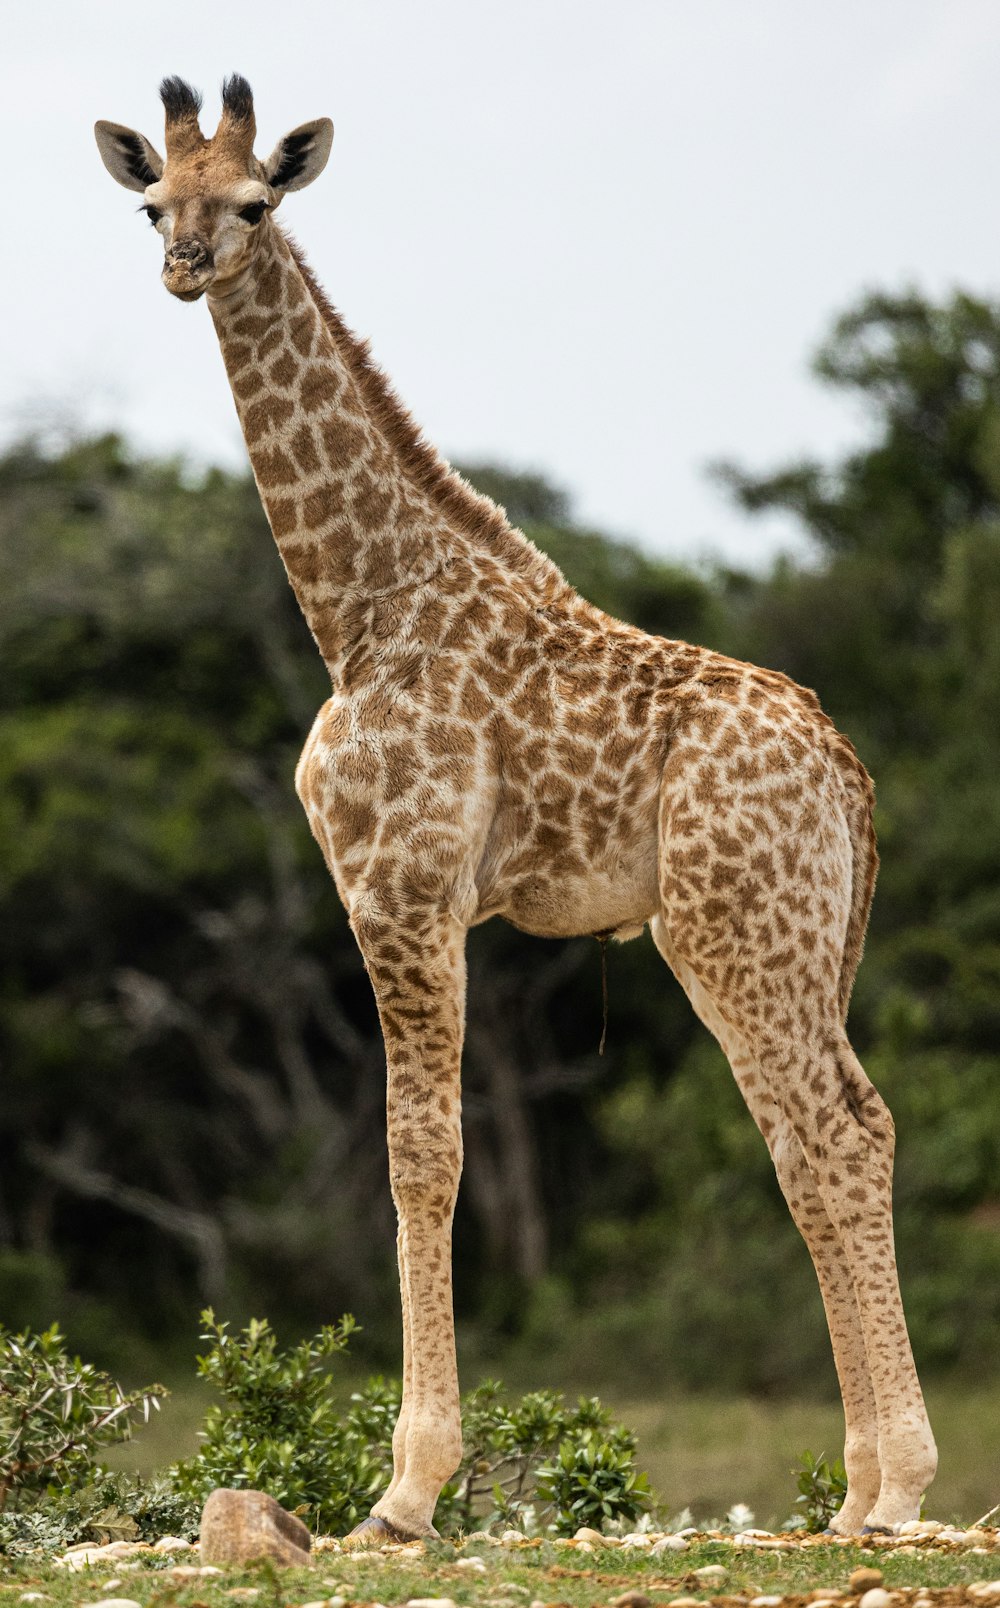 a giraffe standing in a field with trees in the background